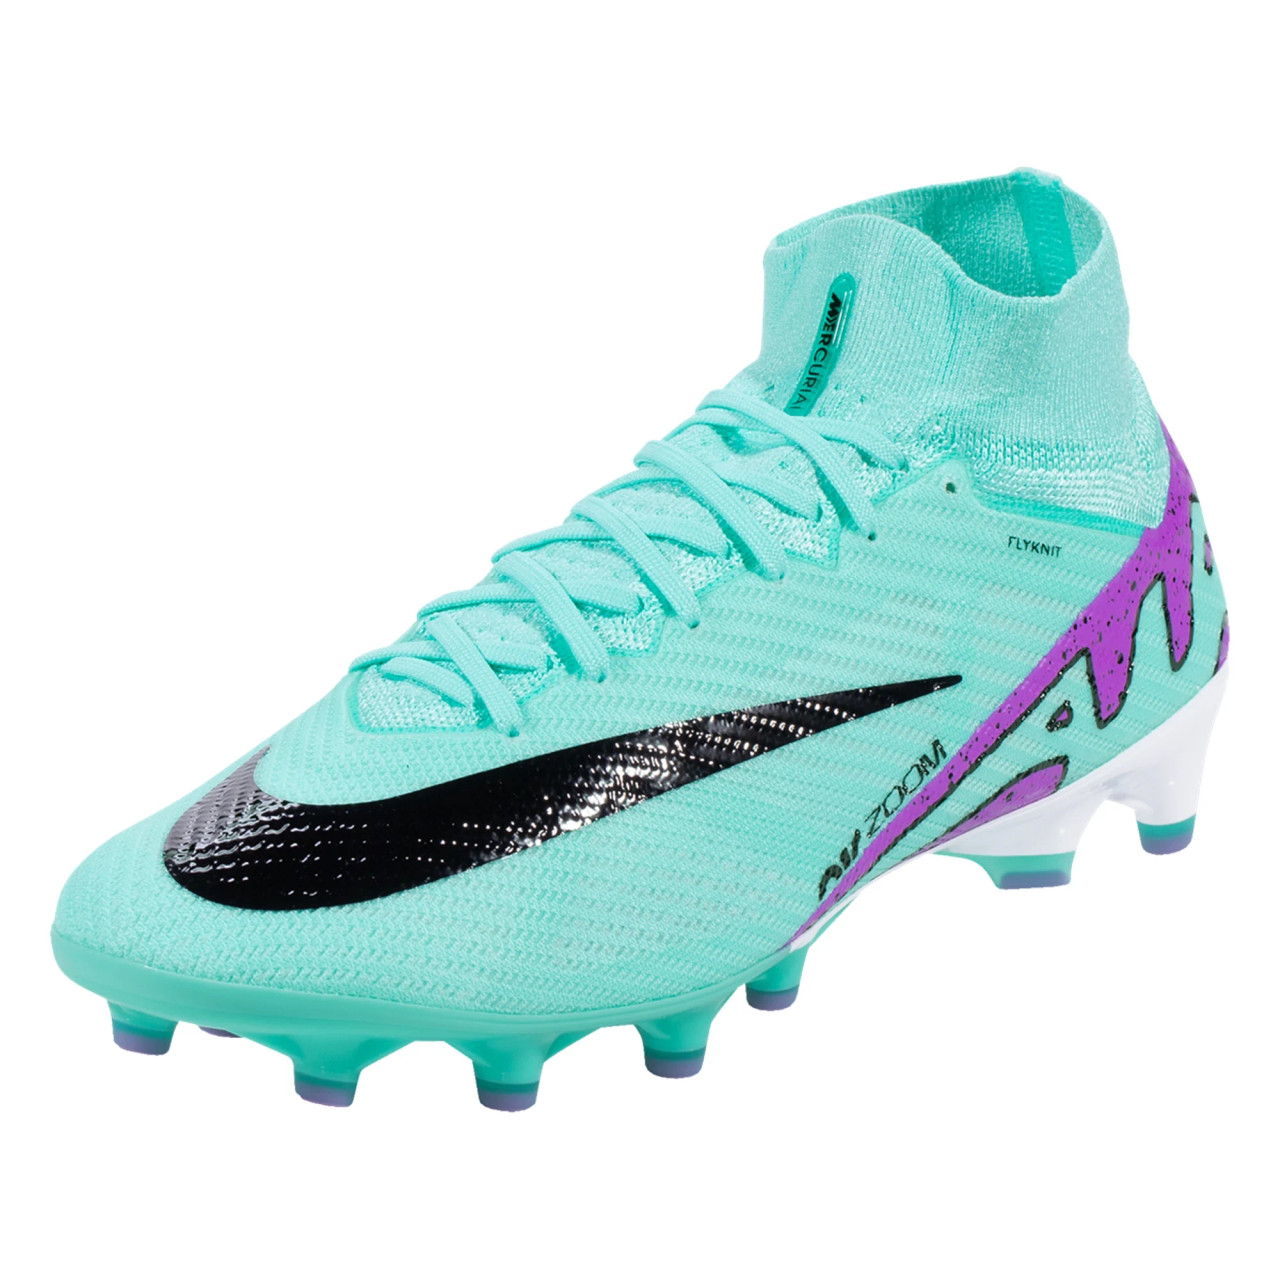 Nike Mercurial Superfly Elite AG Pro Artificial Grass Soccer